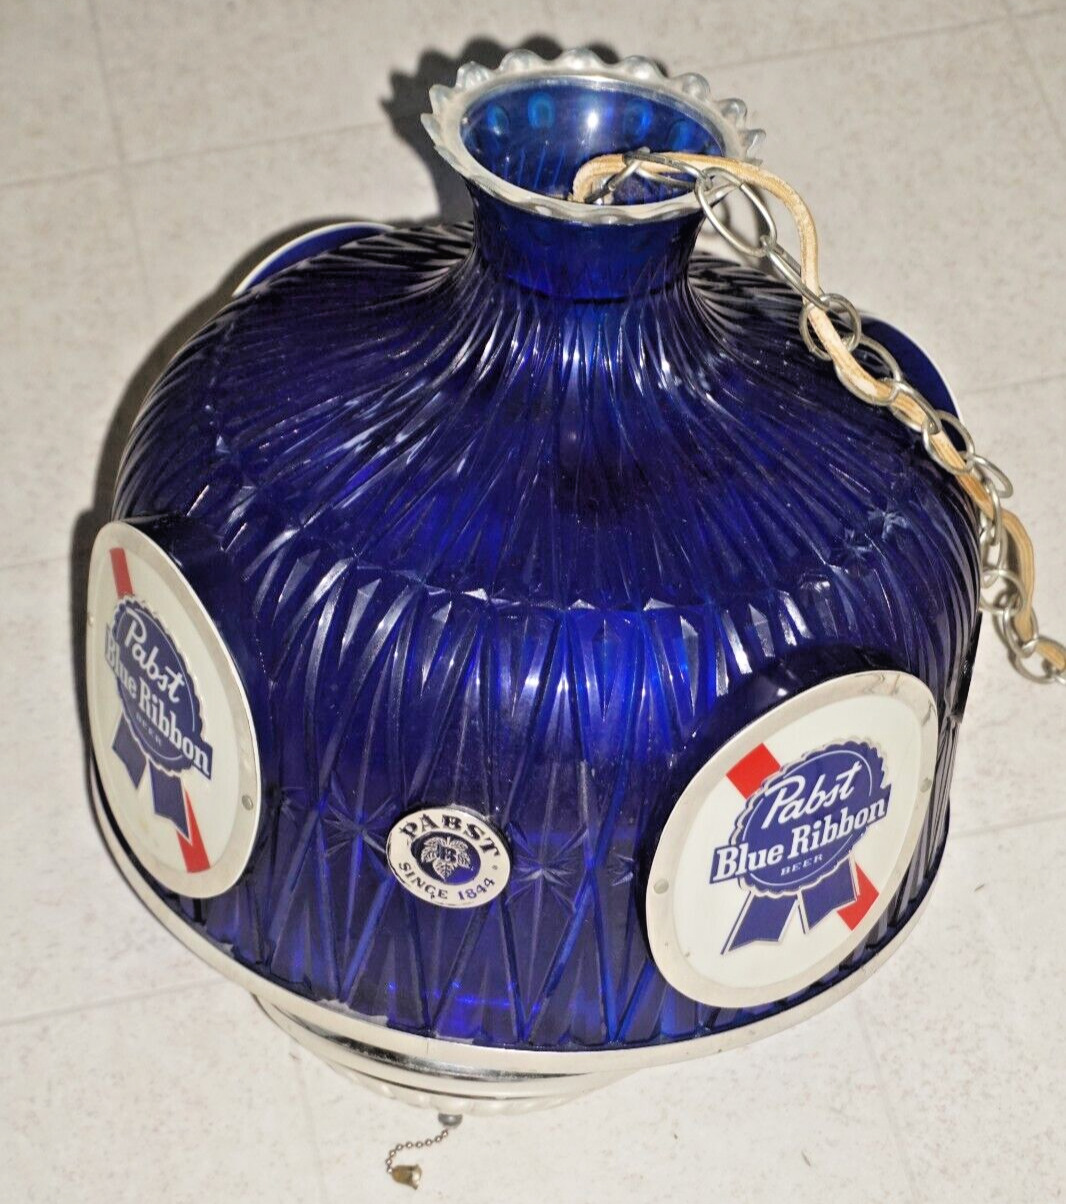 Vintage 1970s Pabst Blue Ribbon Beer Hanging Lamp for poker/pool table, or bar.